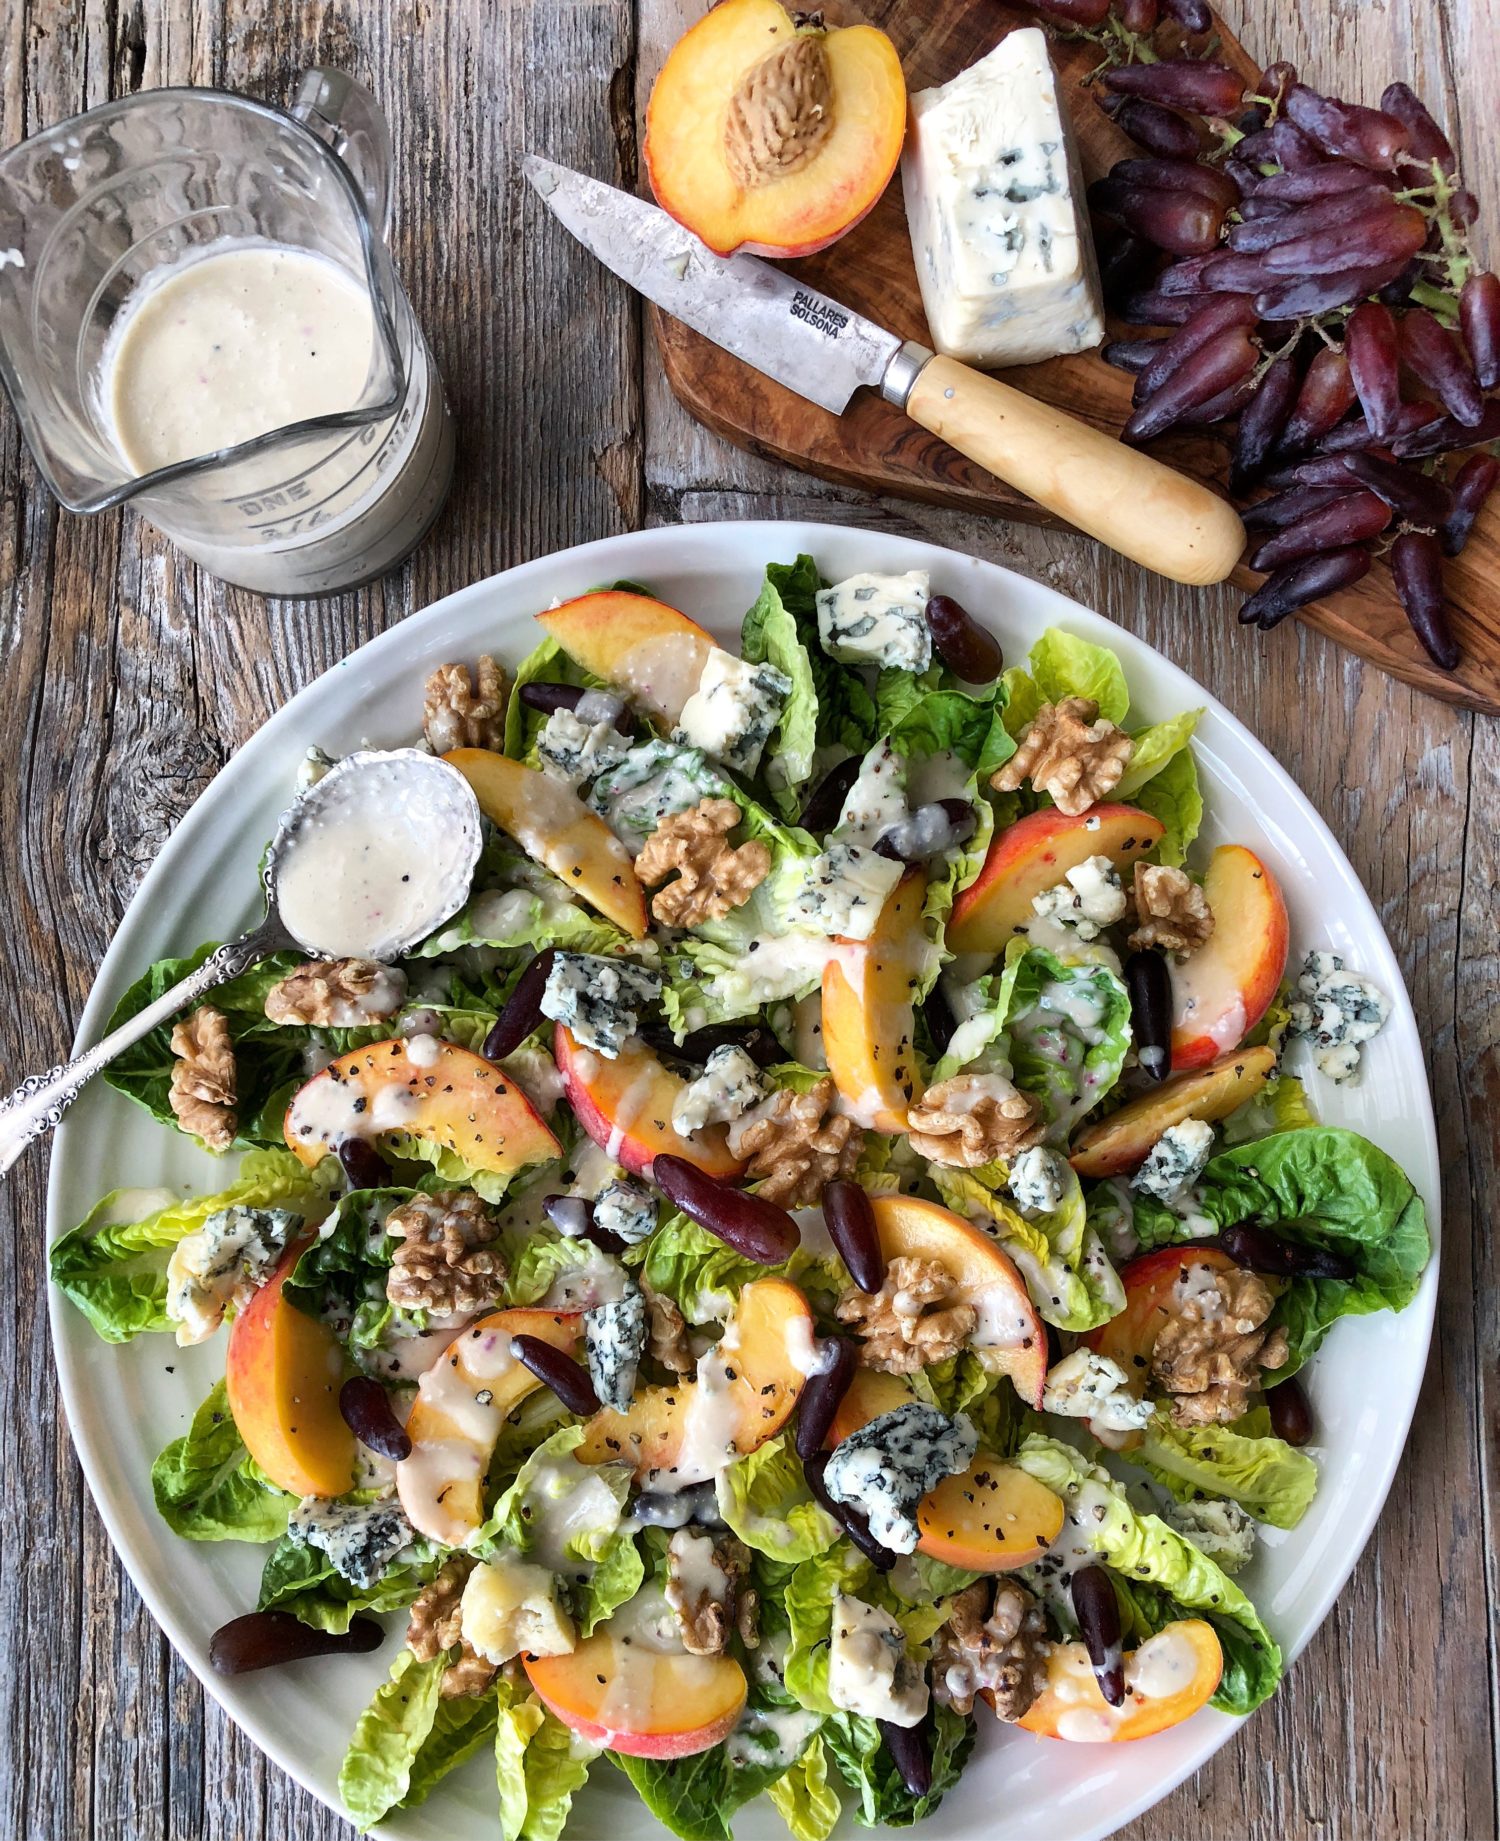 Seasonal Peach and Little Gems Salad with Grapes, Walnuts and Blue Cheese Dressing